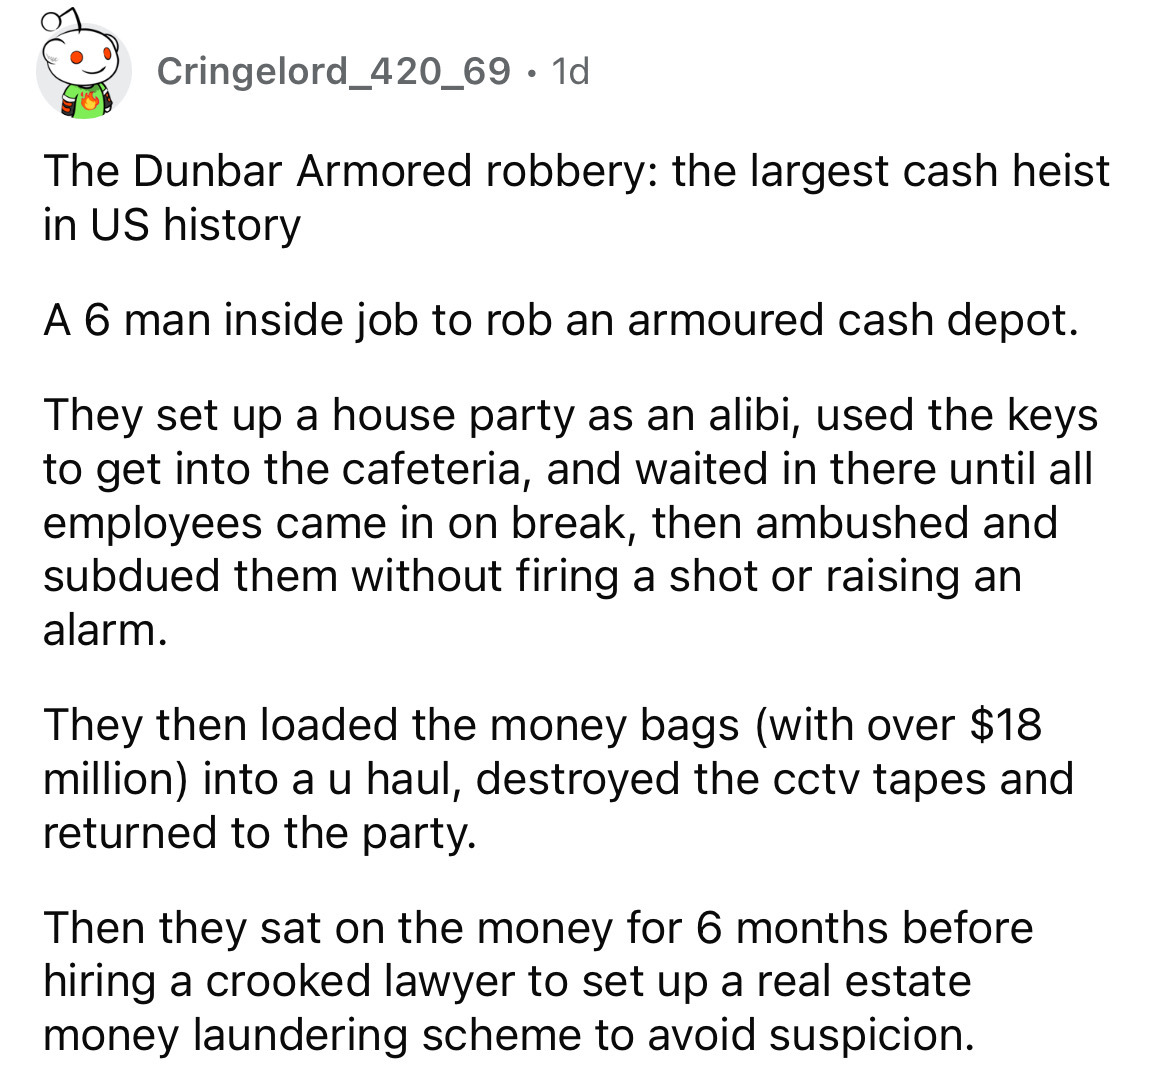 angle - Cringelord_420_69. 1d The Dunbar Armored robbery the largest cash heist in Us history A 6 man inside job to rob an armoured cash depot. They set up a house party as an alibi, used the keys to get into the cafeteria, and waited in there until all e